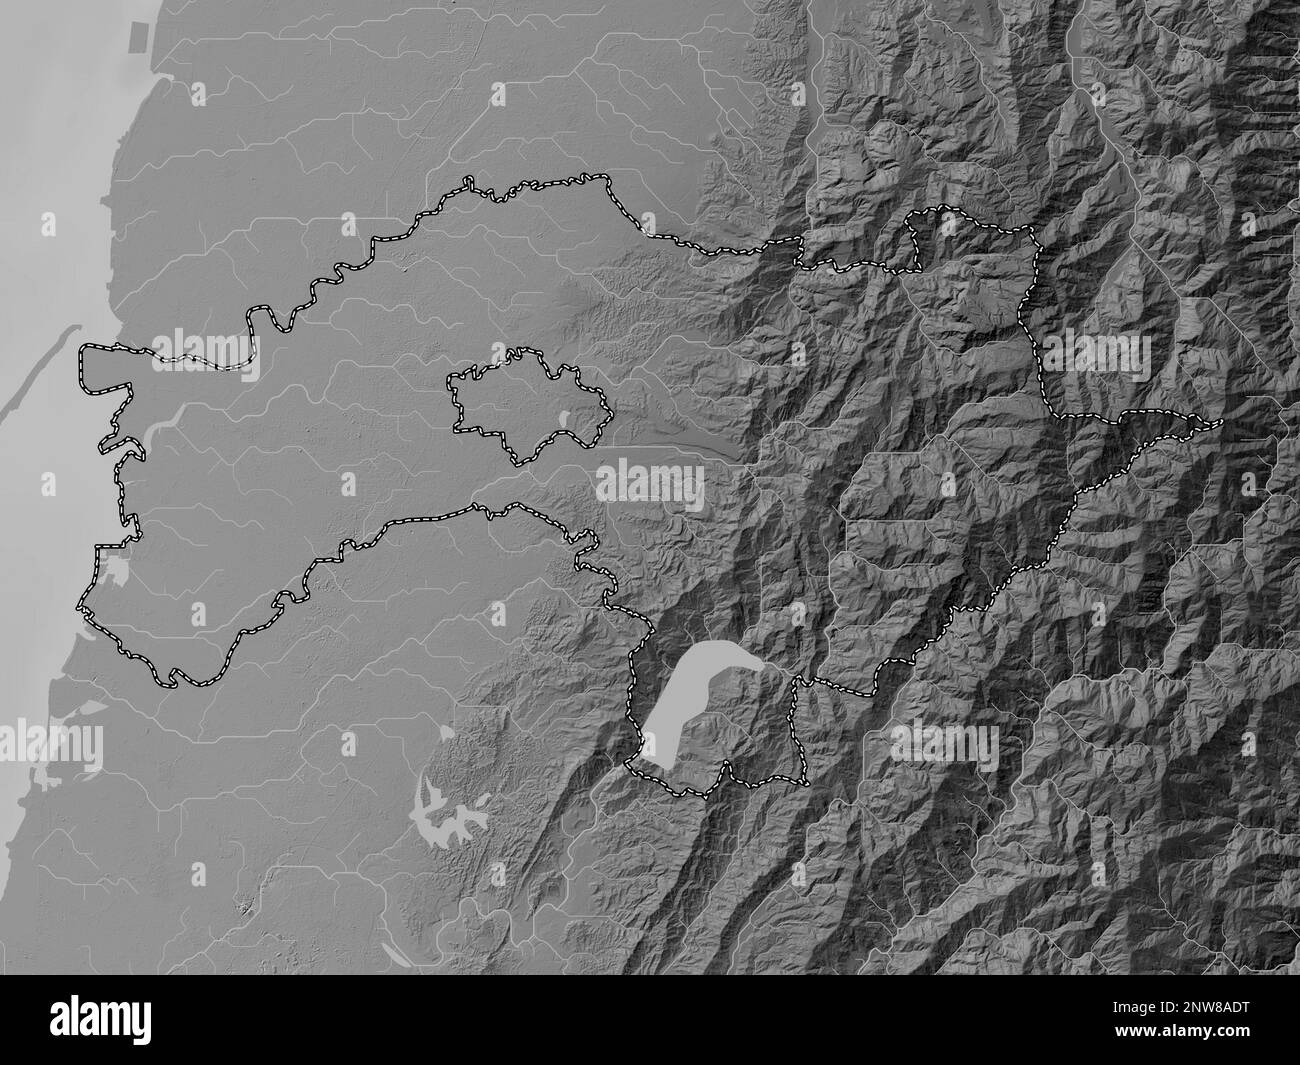 Chiayi, county of Taiwan. Grayscale elevation map with lakes and rivers Stock Photo